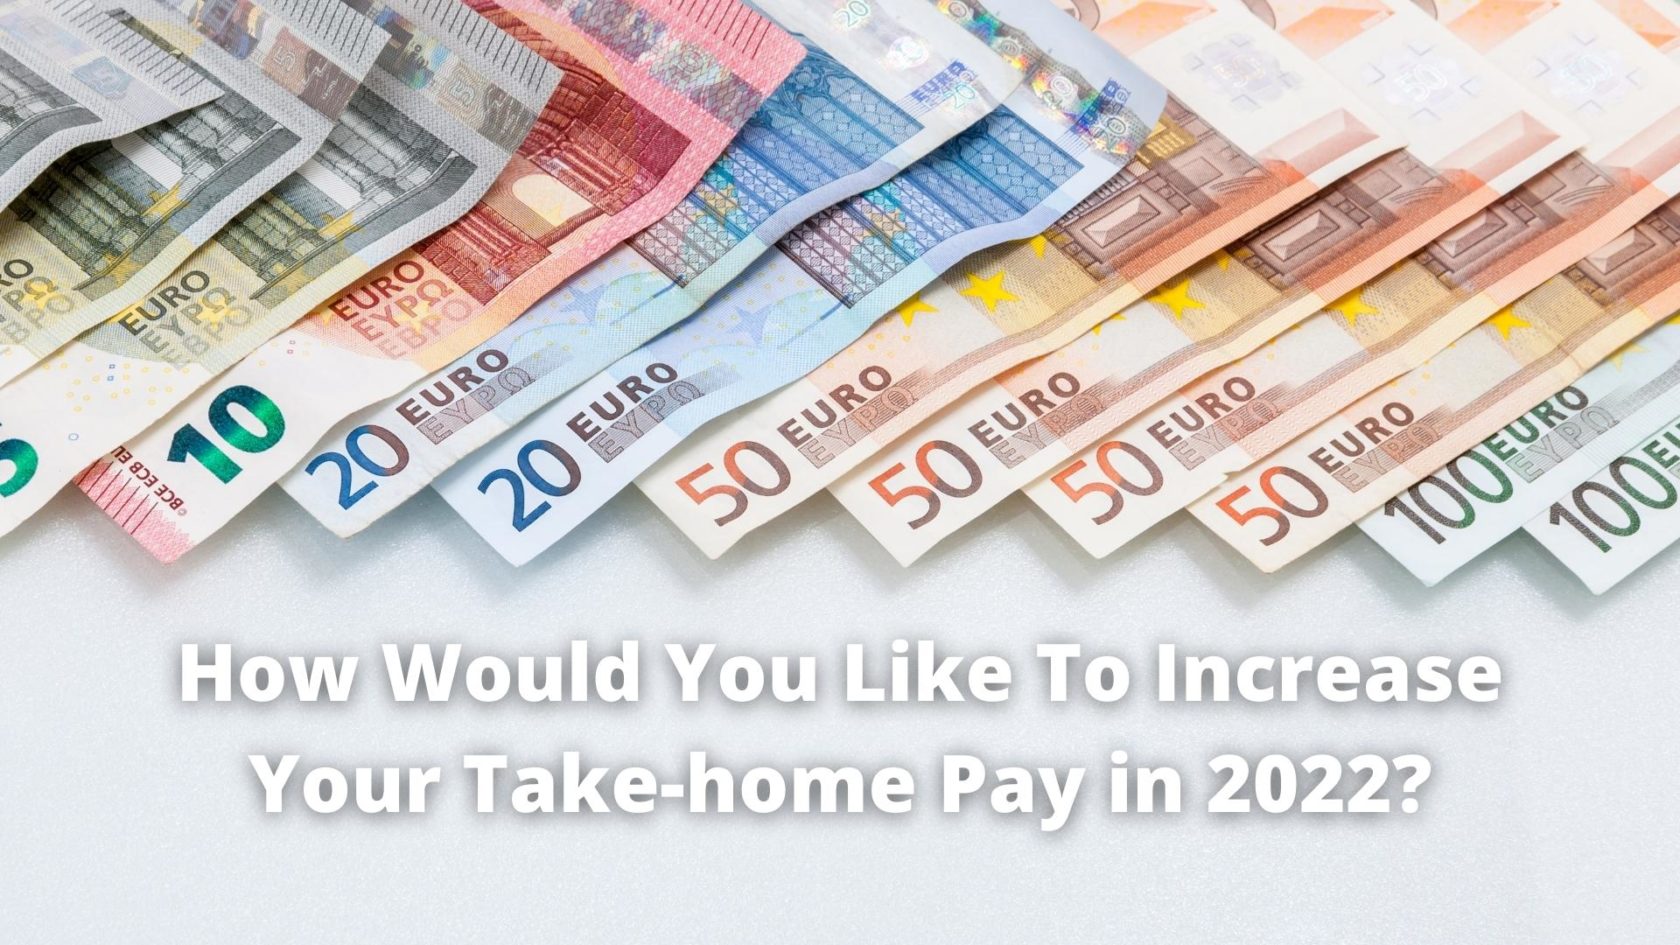 How Would You Like To Increase Your Take-home Pay in 2022?